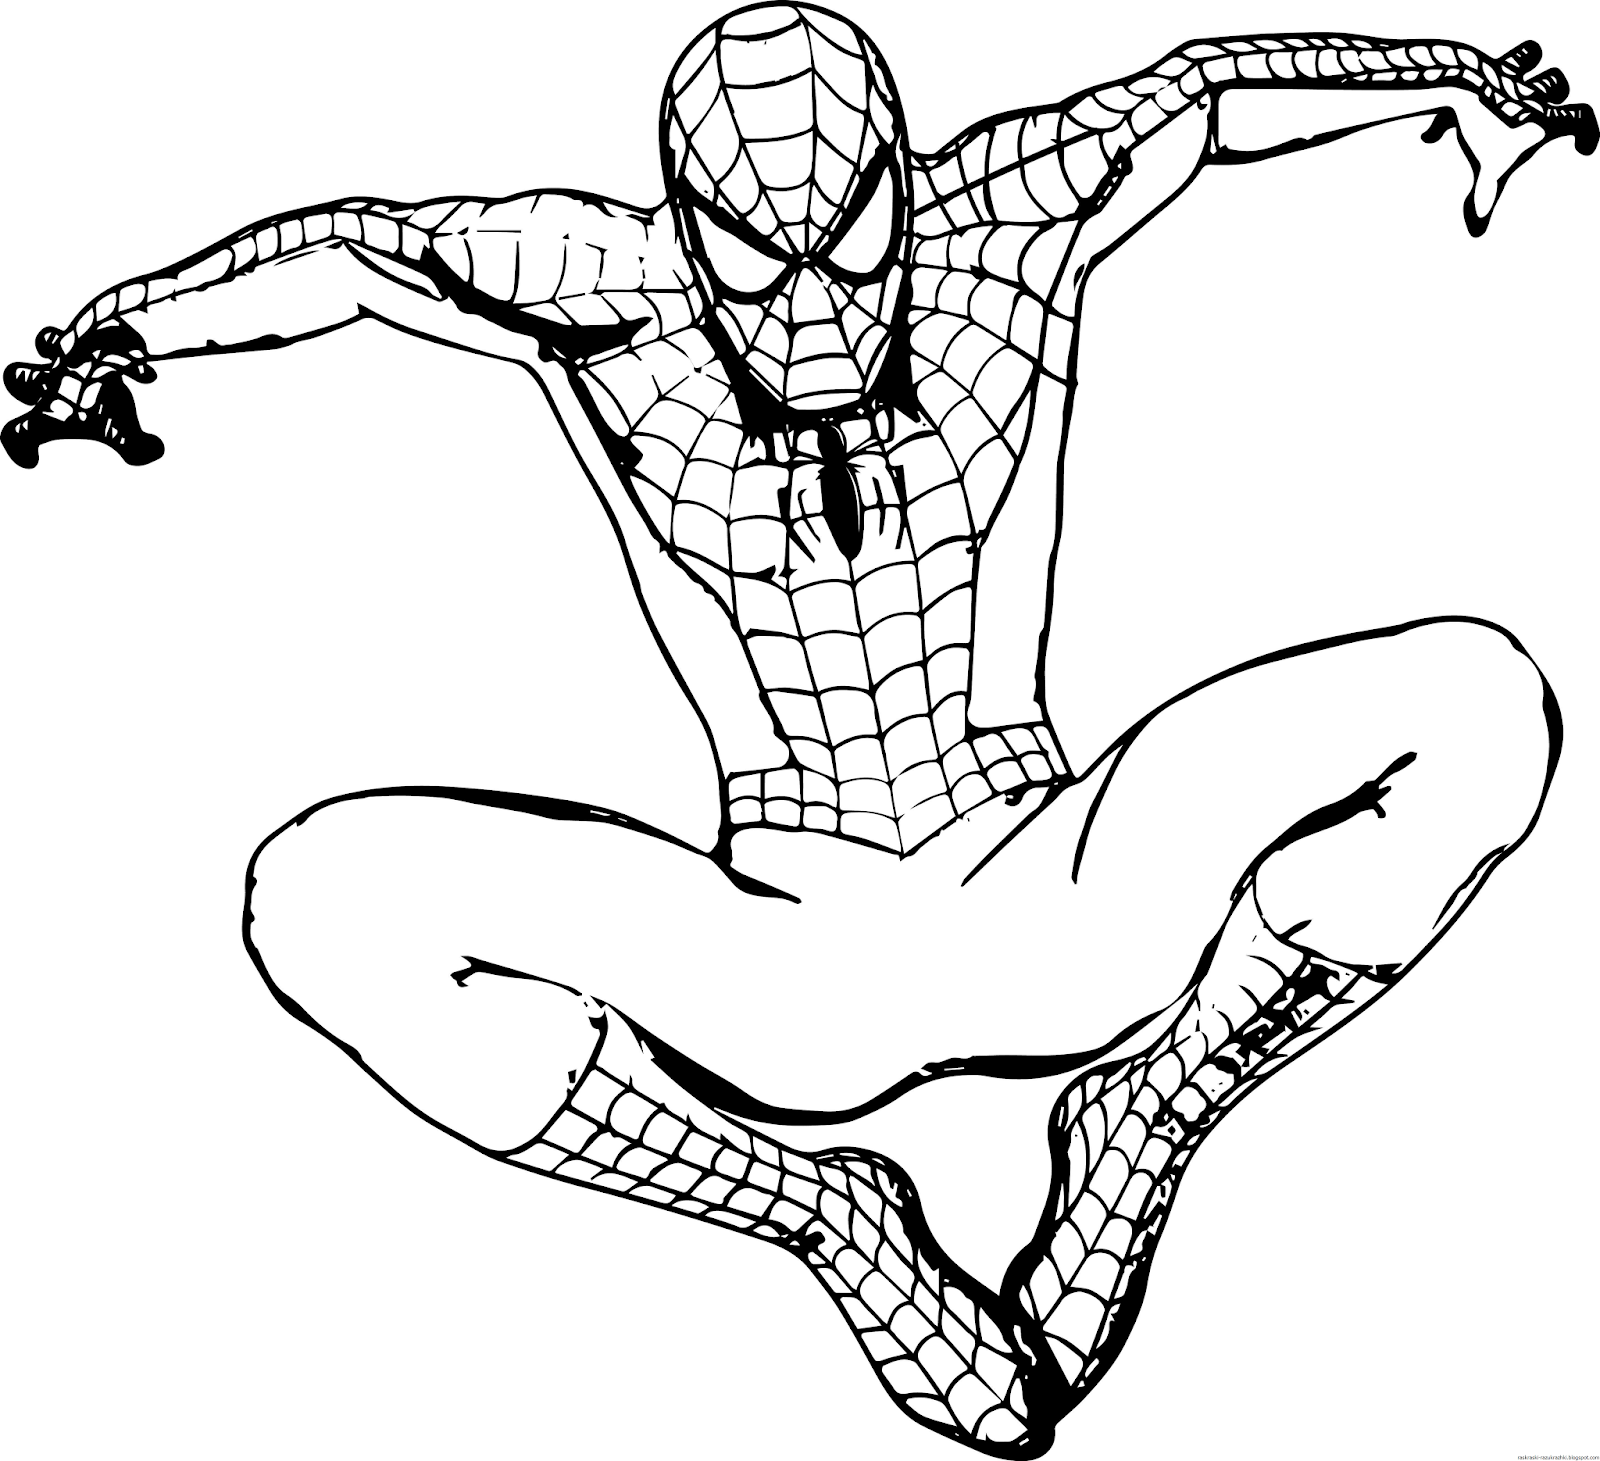 Courtesy Spiderman antistress coloring book